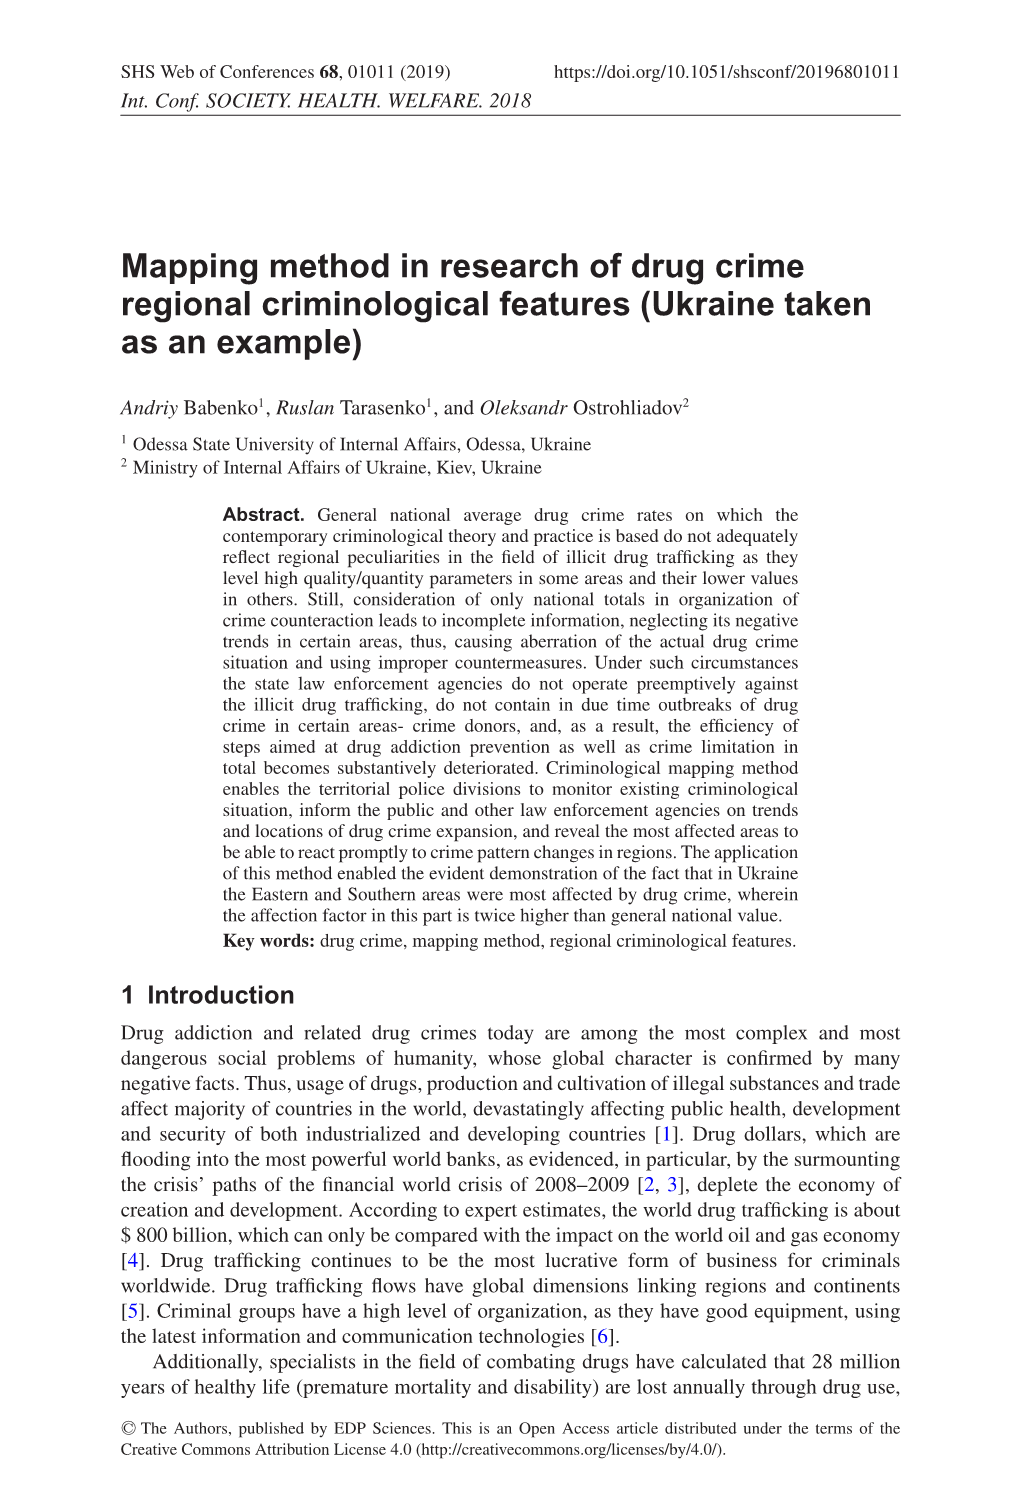 Mapping Method in Research of Drug Crime Regional Criminological Features (Ukraine Taken As an Example)